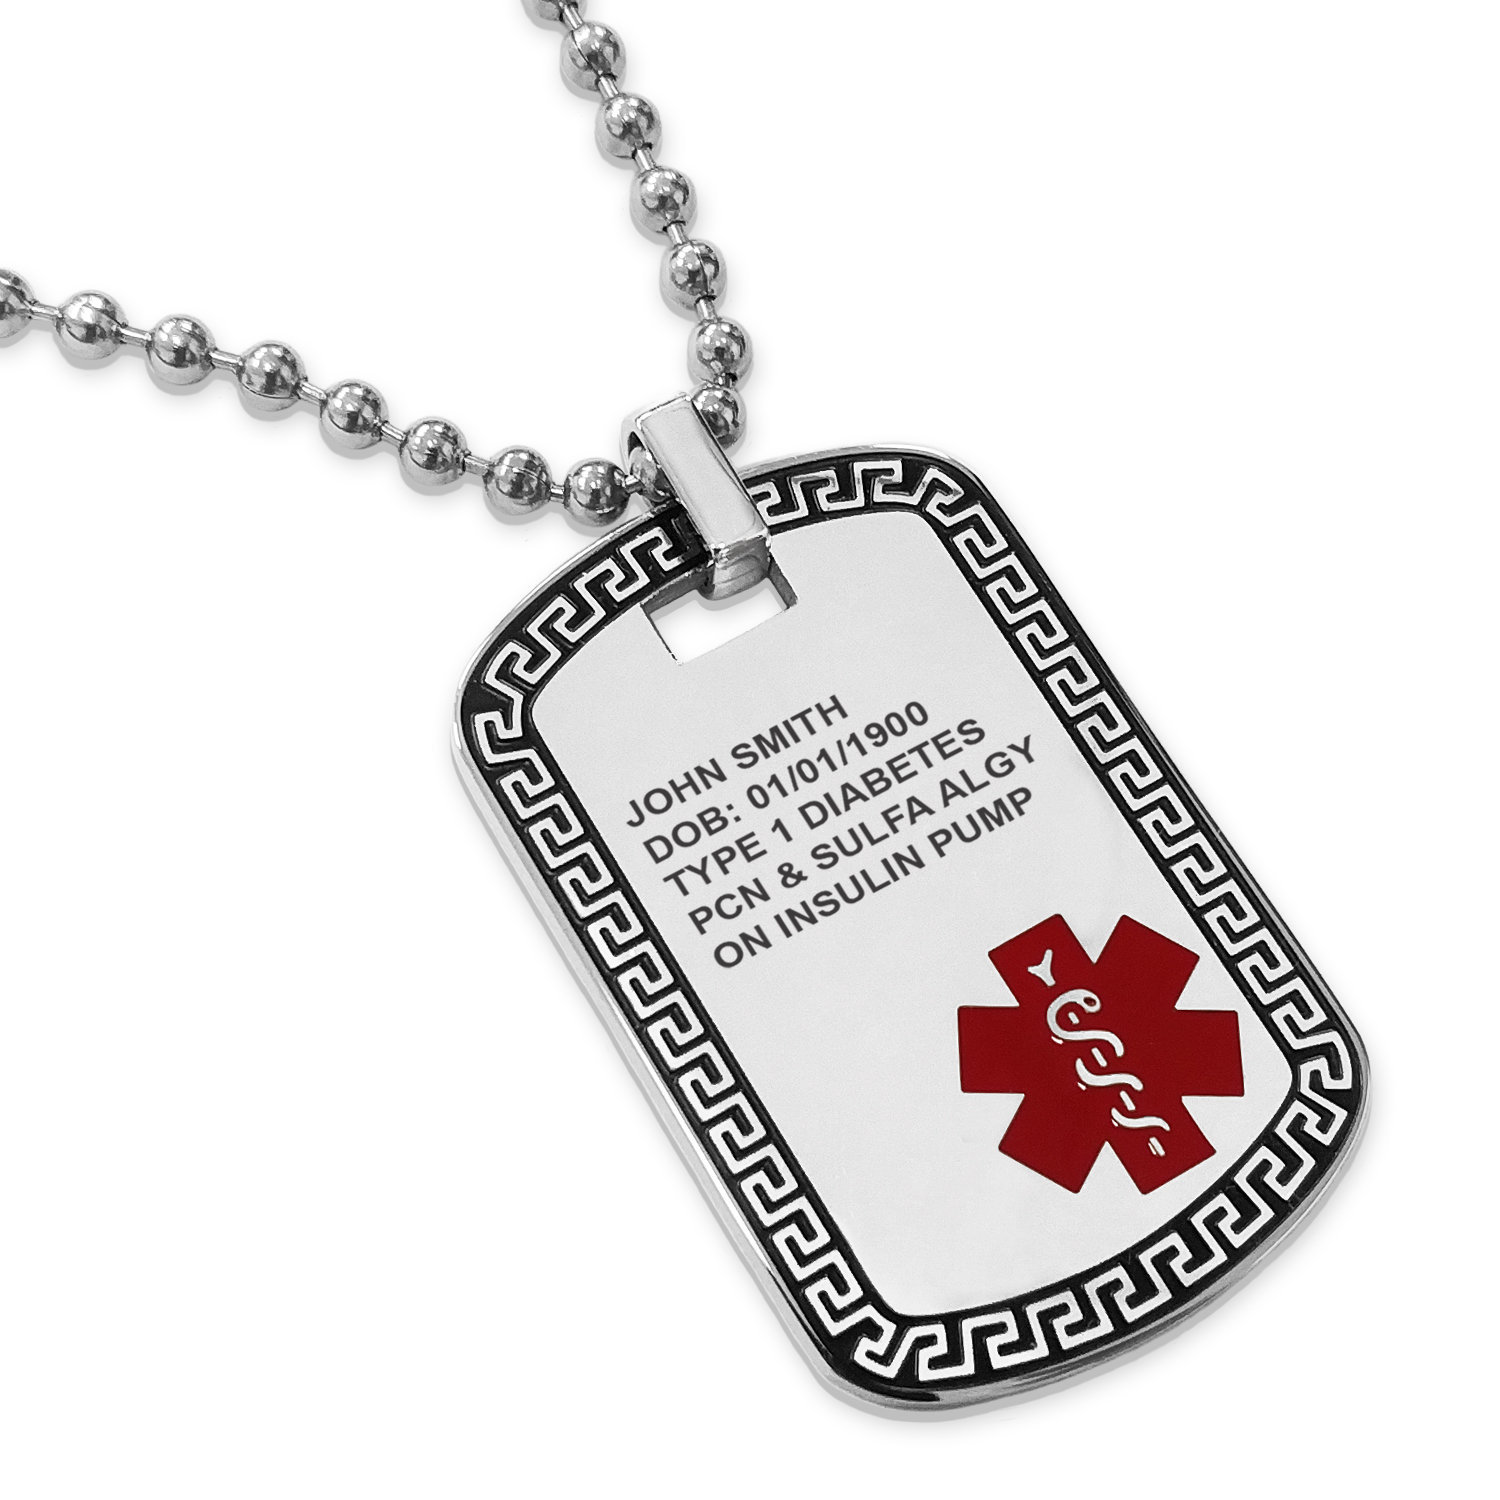 Engraved Medical Alert Tag ID Necklace Emergency SOS ICE Pendant Phone Identify